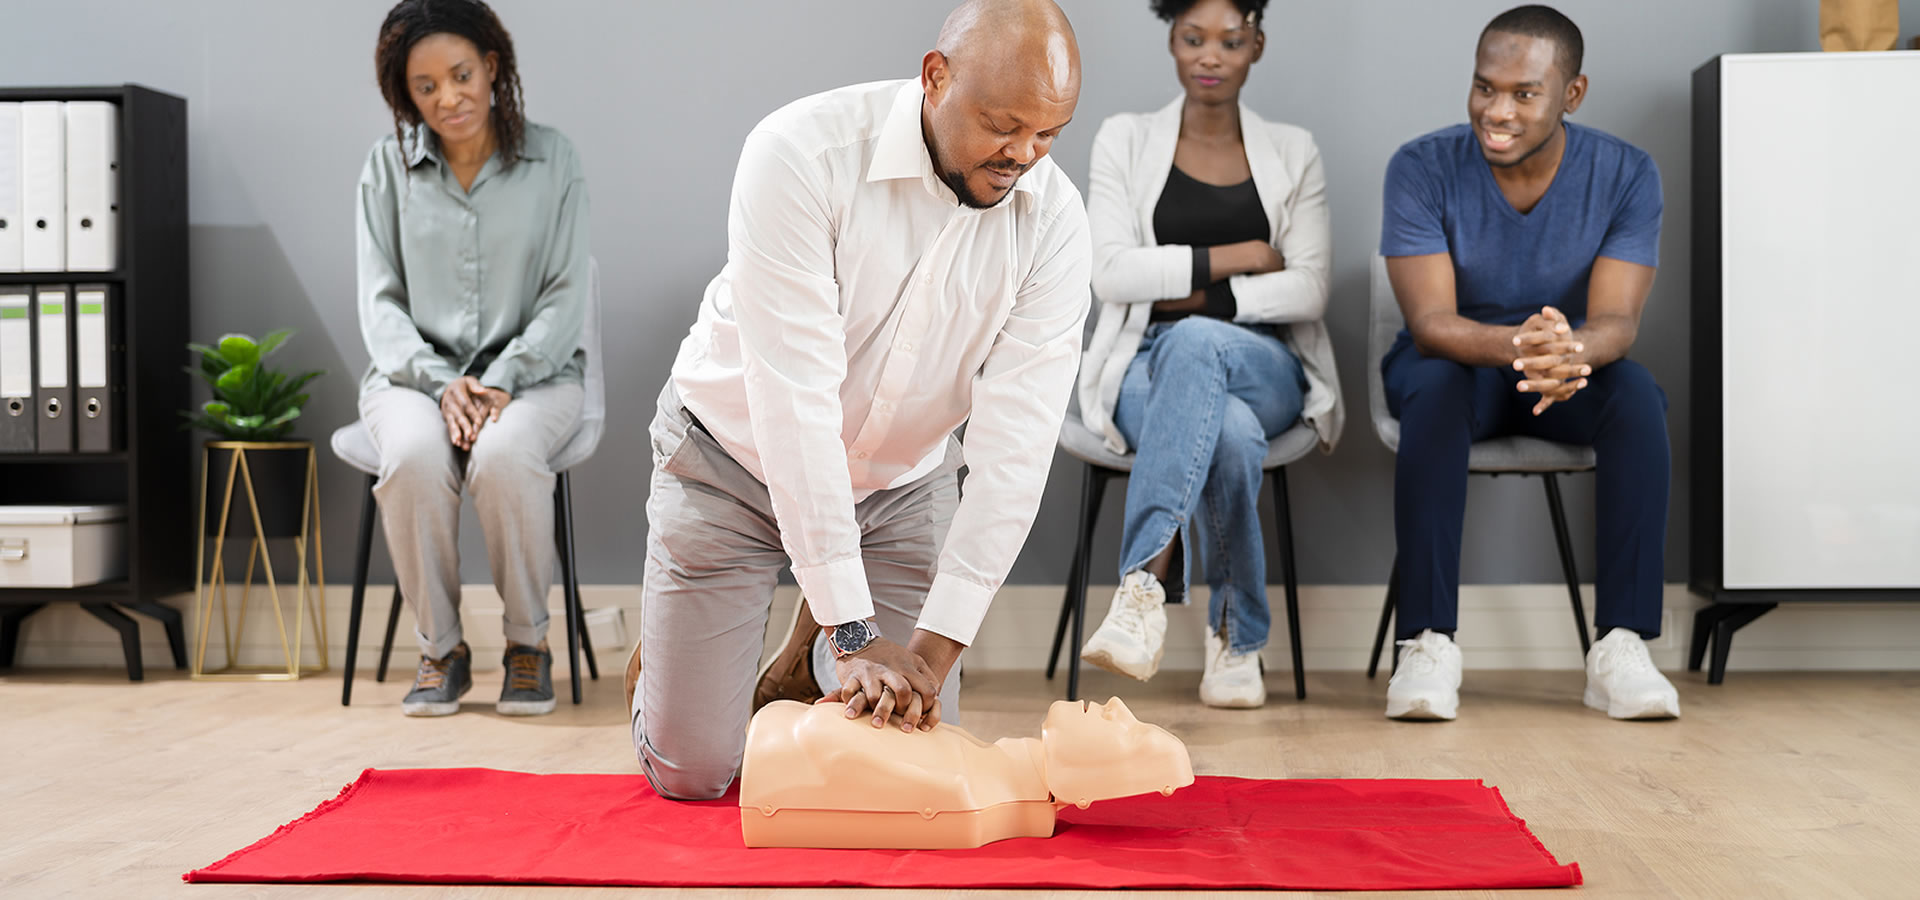 How to Get Certified in Basic Life Support